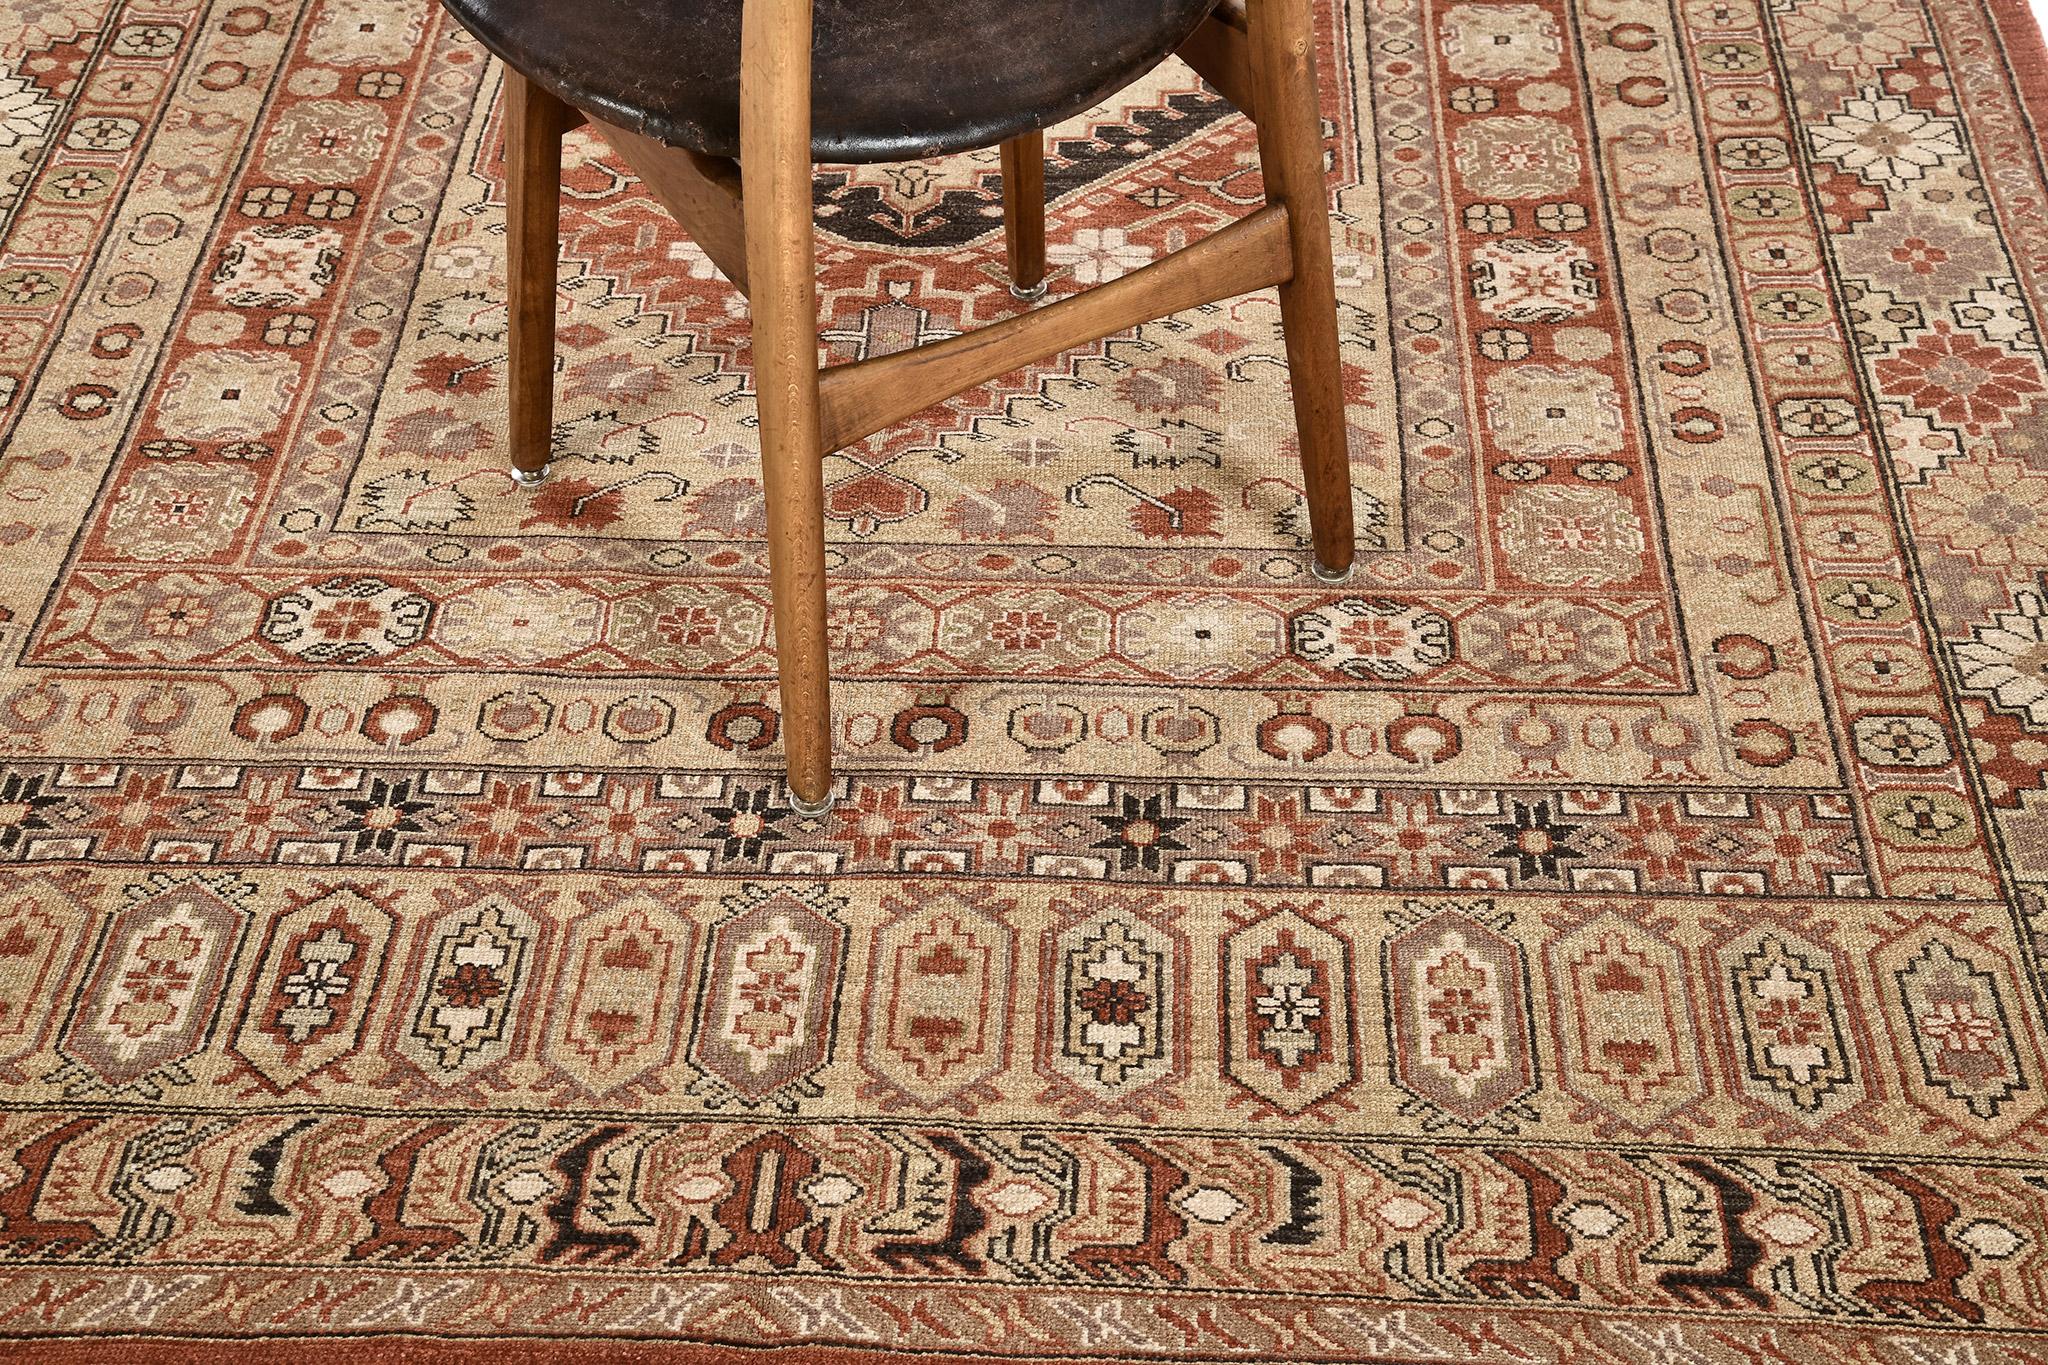 Who wouldn't fall in-love with this Gashgai Style Rug revival? A series of bands runs along the perimeter of the central medallion. Repeated patterns of blooming florettes, rosettes, stars and geometric motifs are gracefully strewn along the